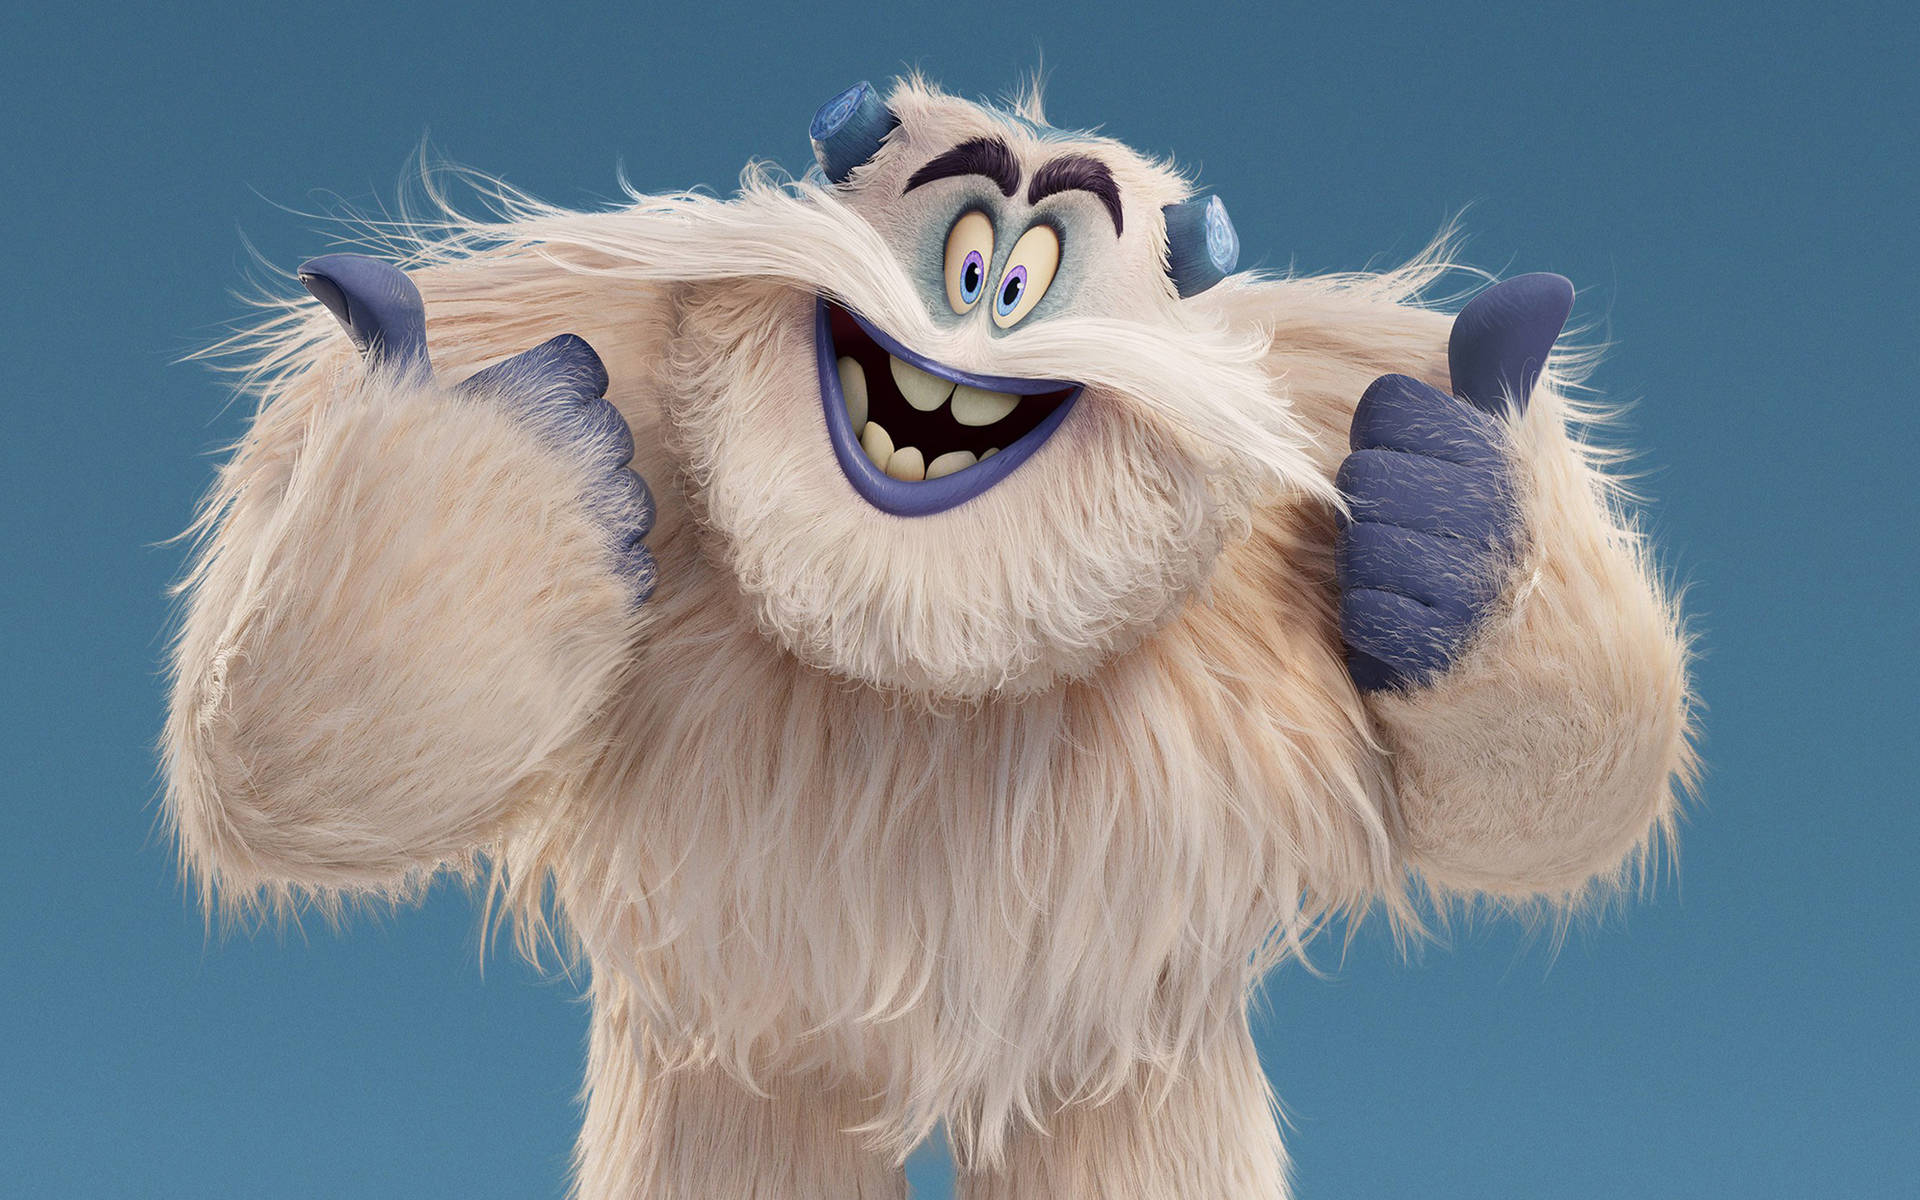 Smallfoot Dorgle Thumbs Up Background